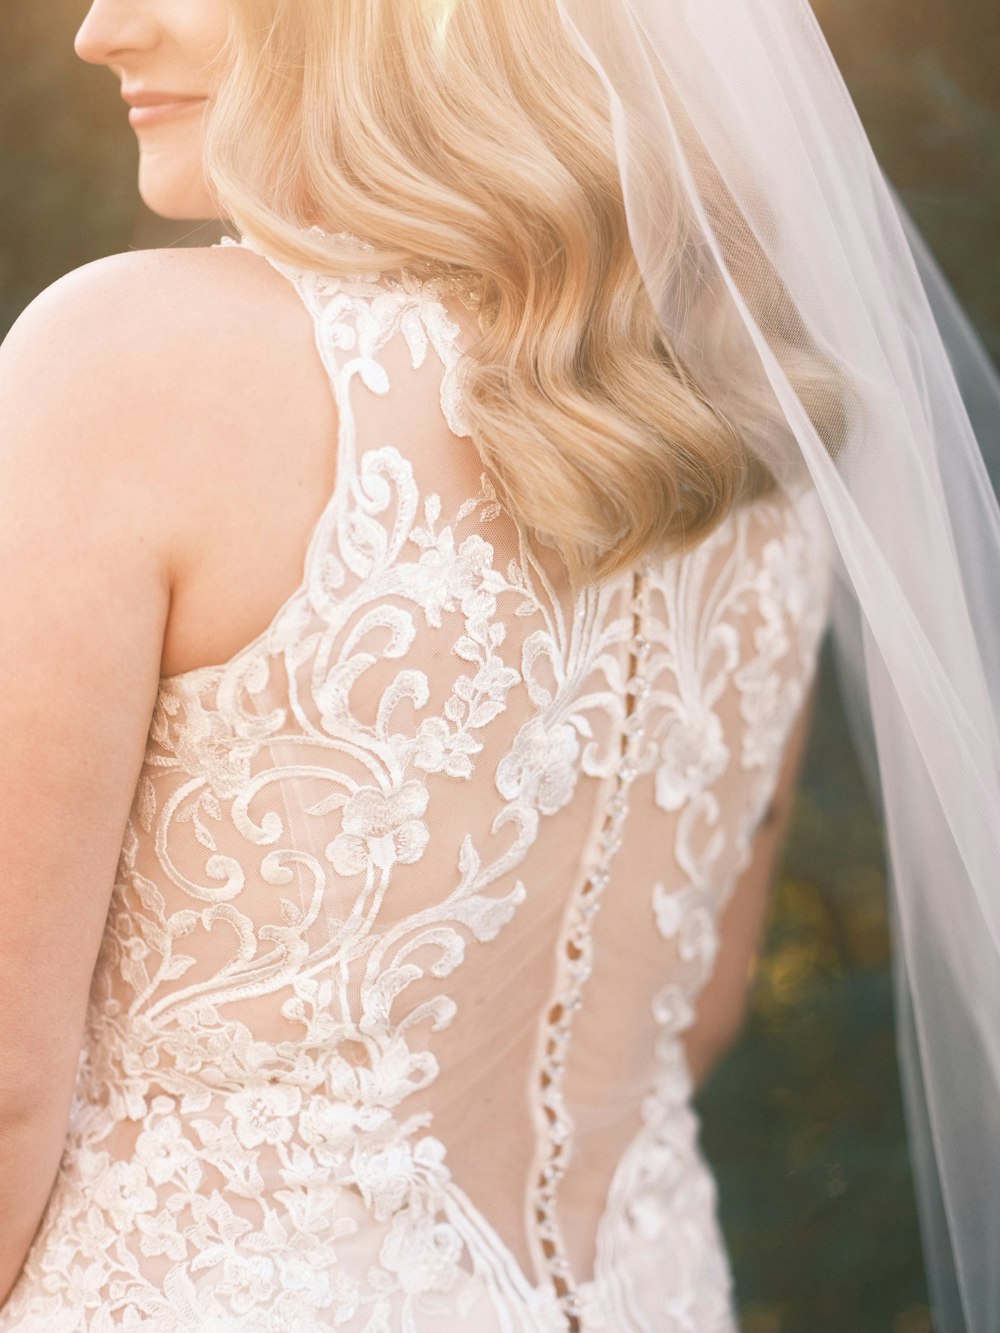 the back of a bride's dress with a veil